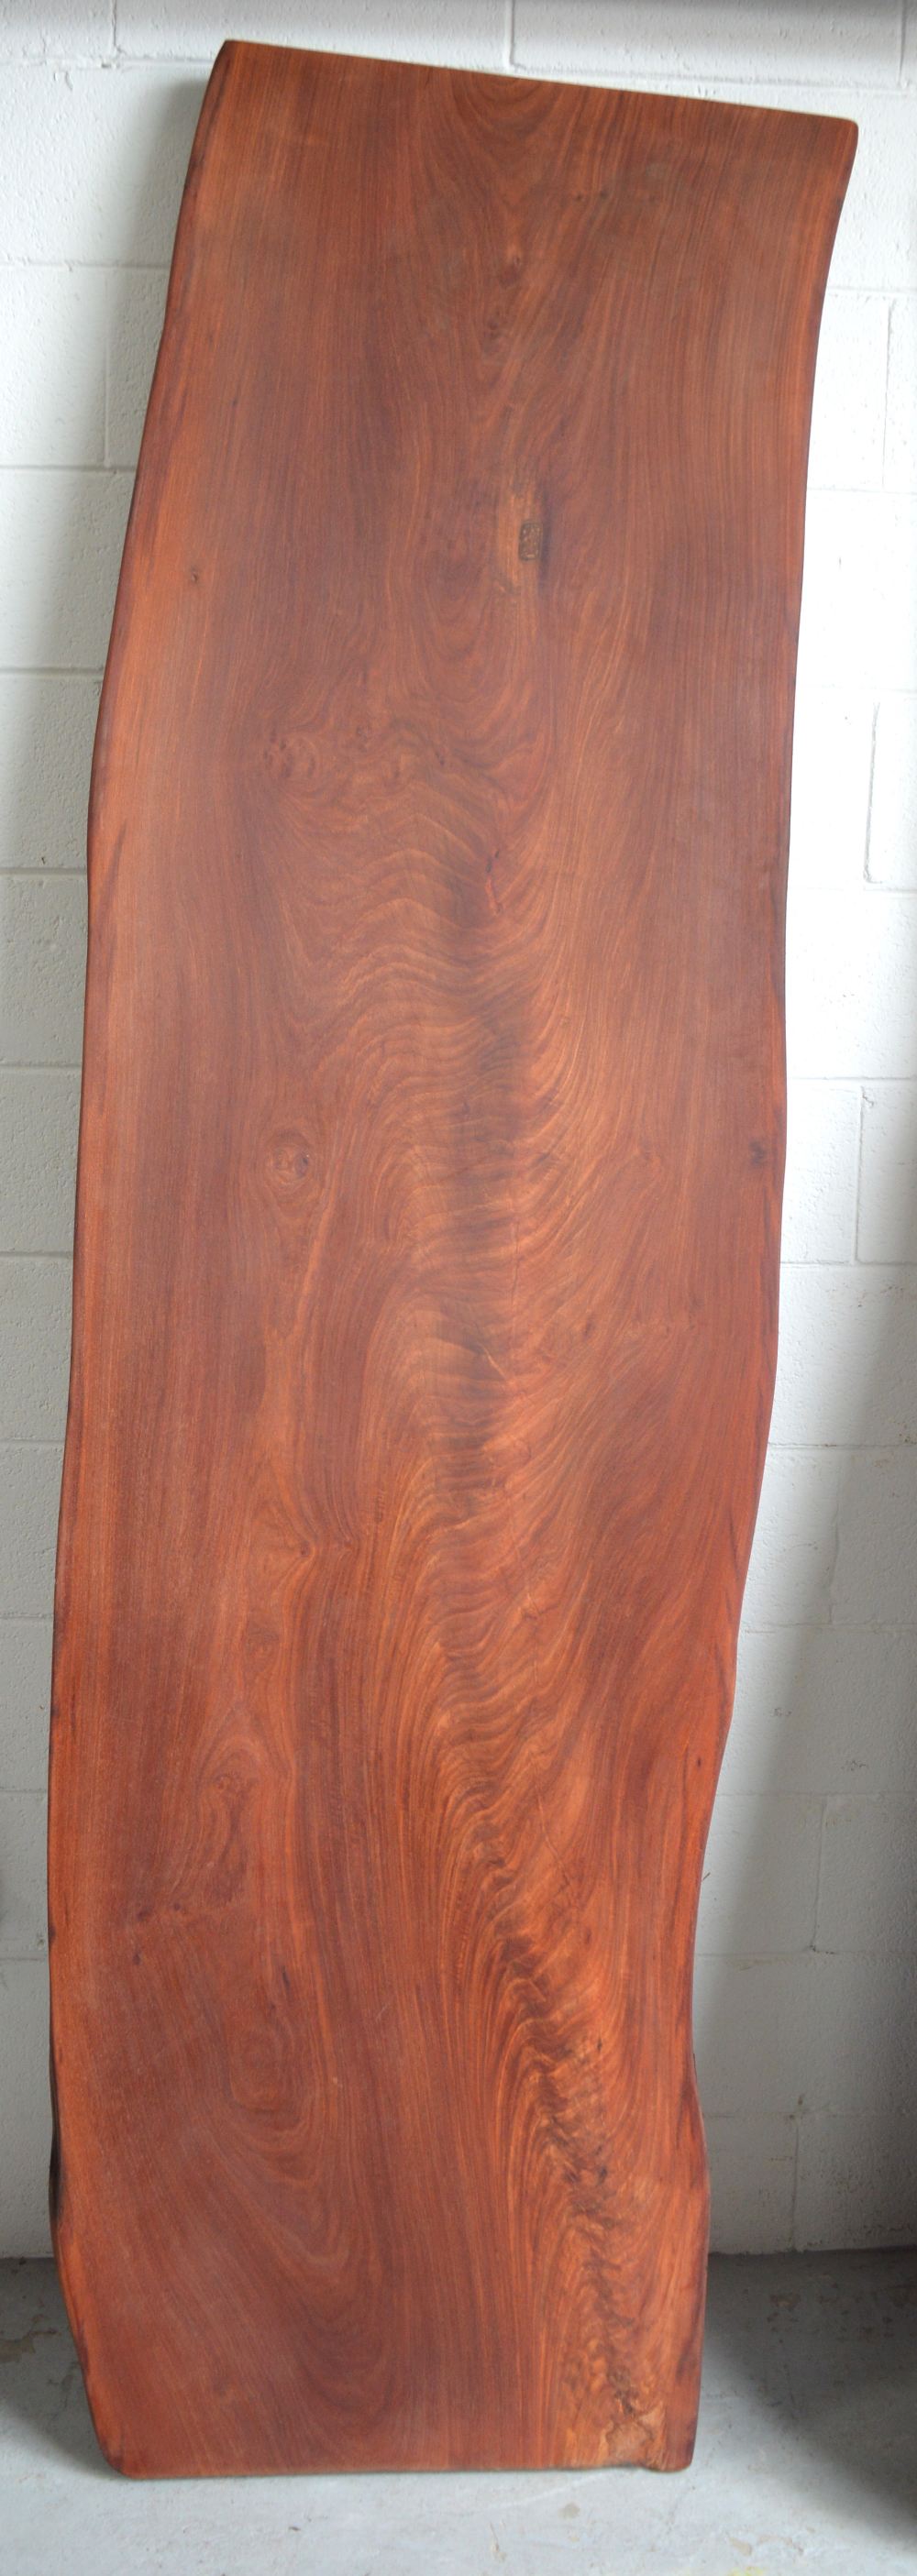 A well finished naturalistic hardwood dining table top, 260 x 65cm.